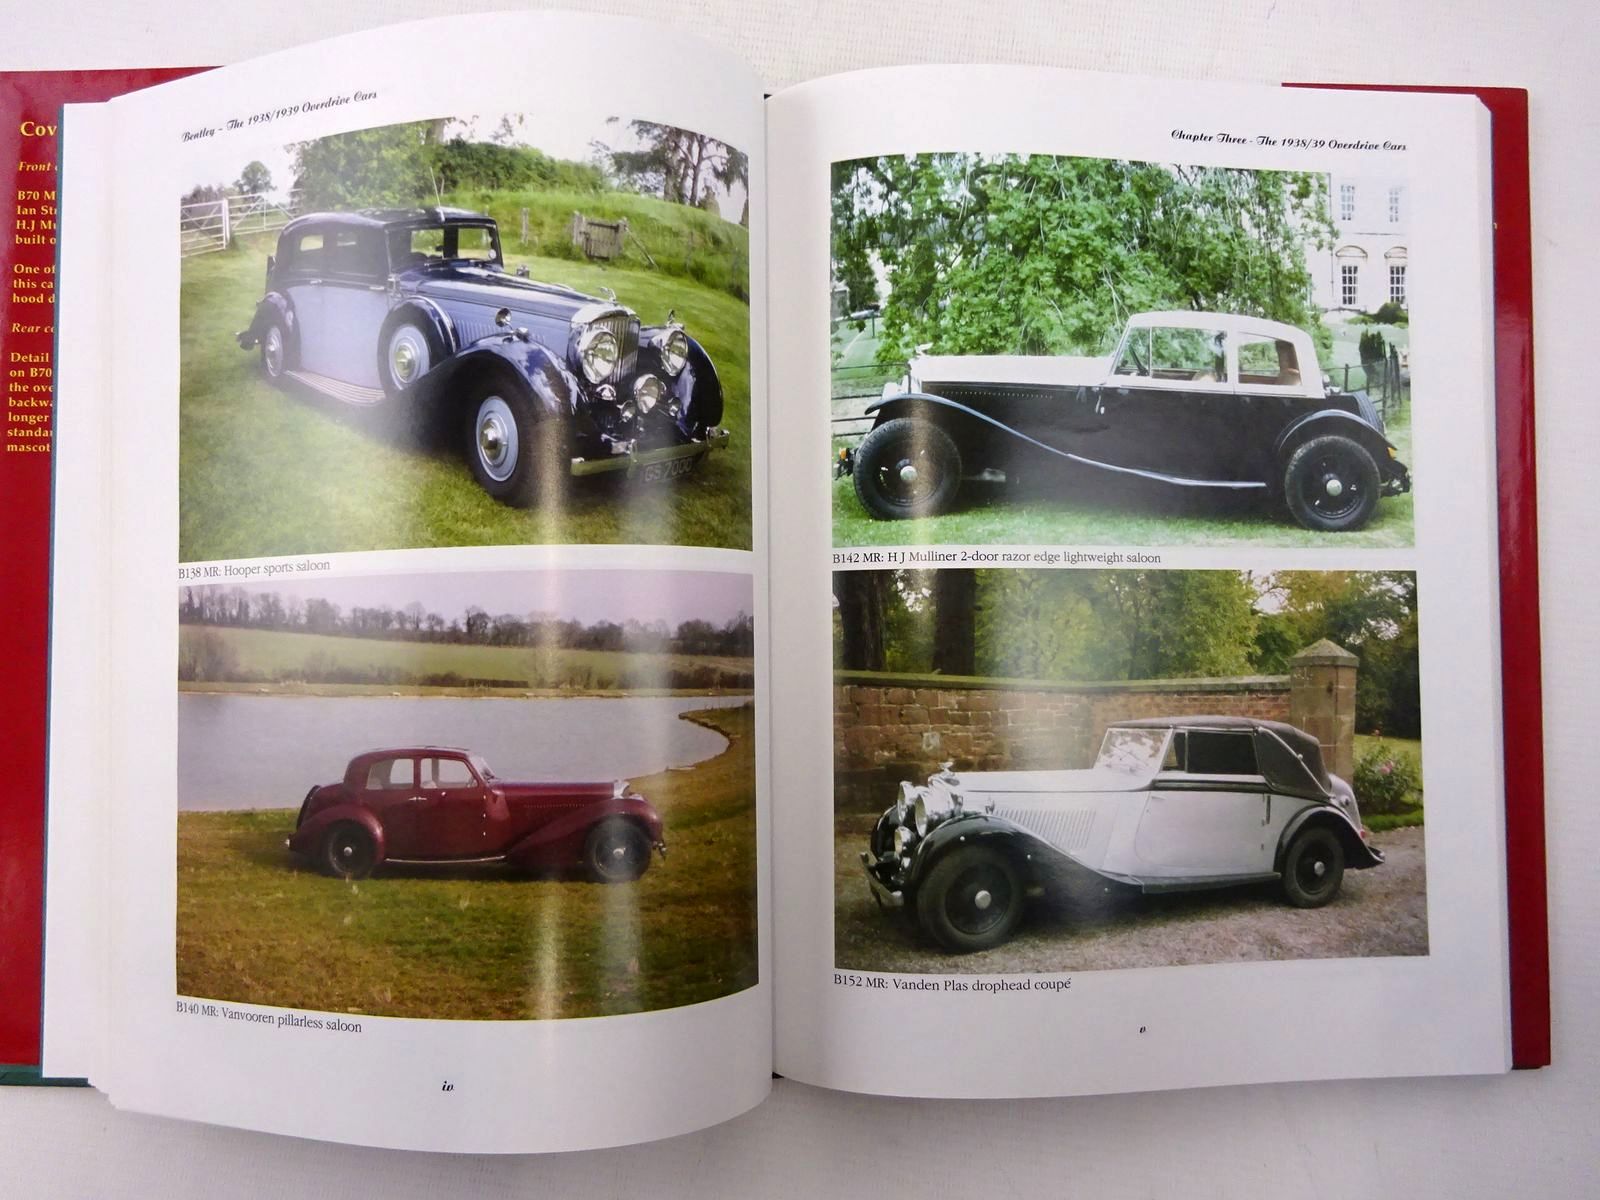 Photo of BENTLEY THE 1938/1939 OVERDRIVE CARS written by Frankel, Mervyn
Strang, Ian published by Academy Books (STOCK CODE: 2129338)  for sale by Stella & Rose's Books